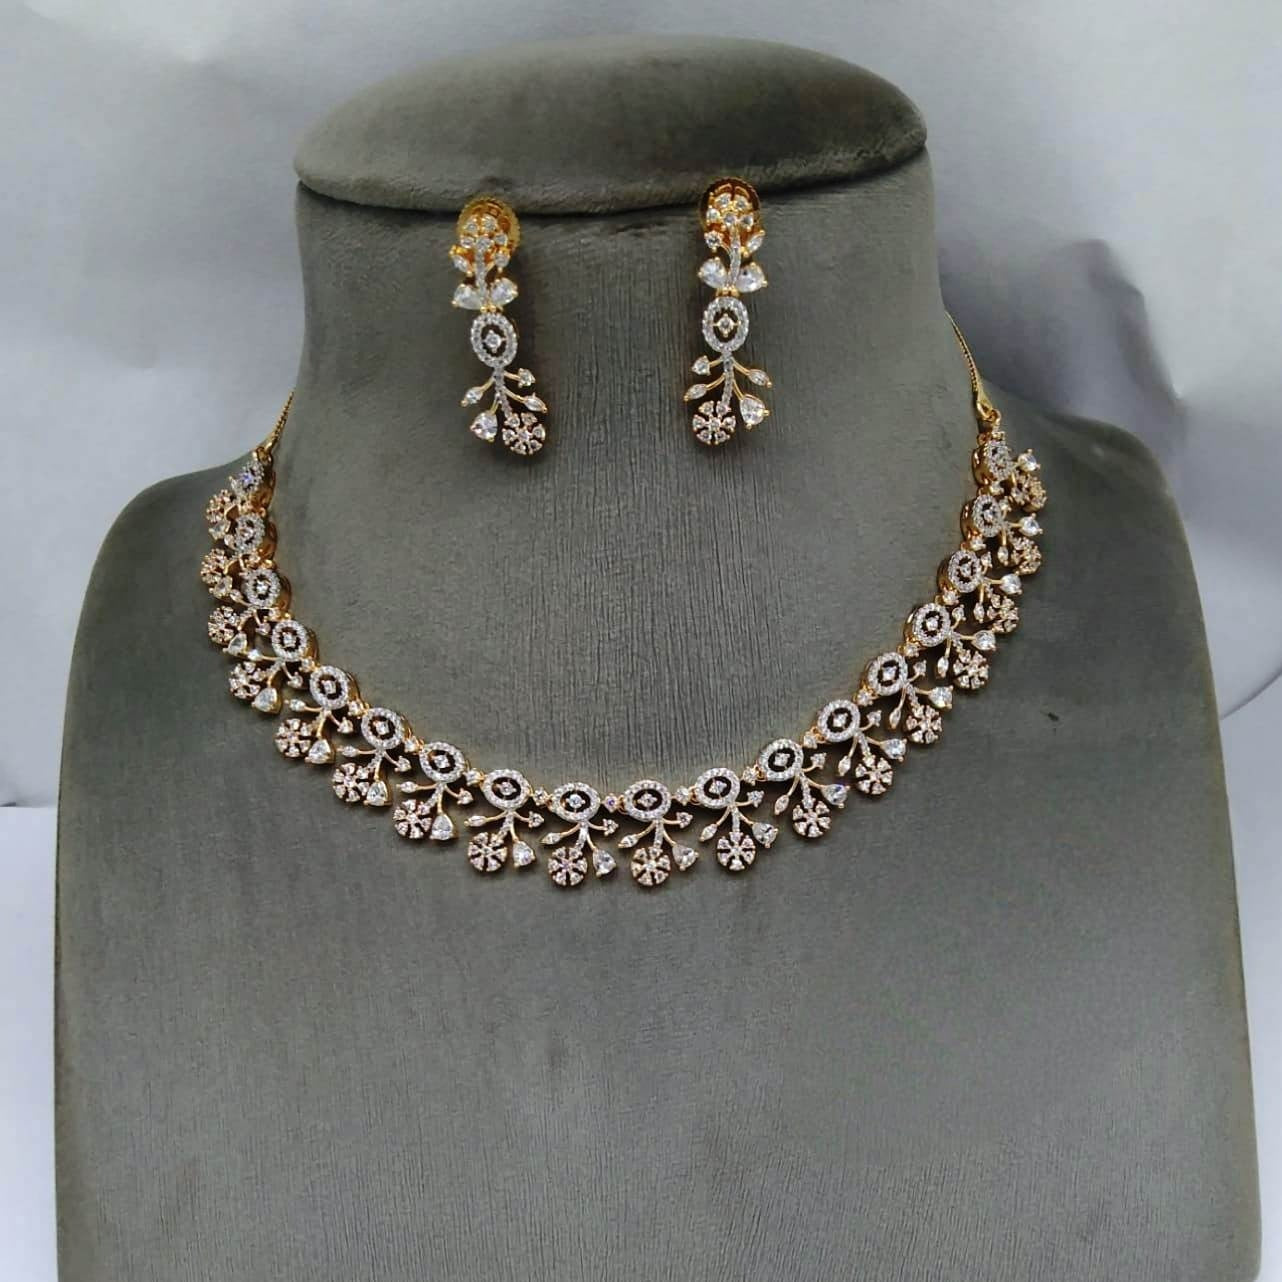 American Diamond Necklace and Earrings Ensemble, occassion jewellery,partywear jewellery, wedding jewellery